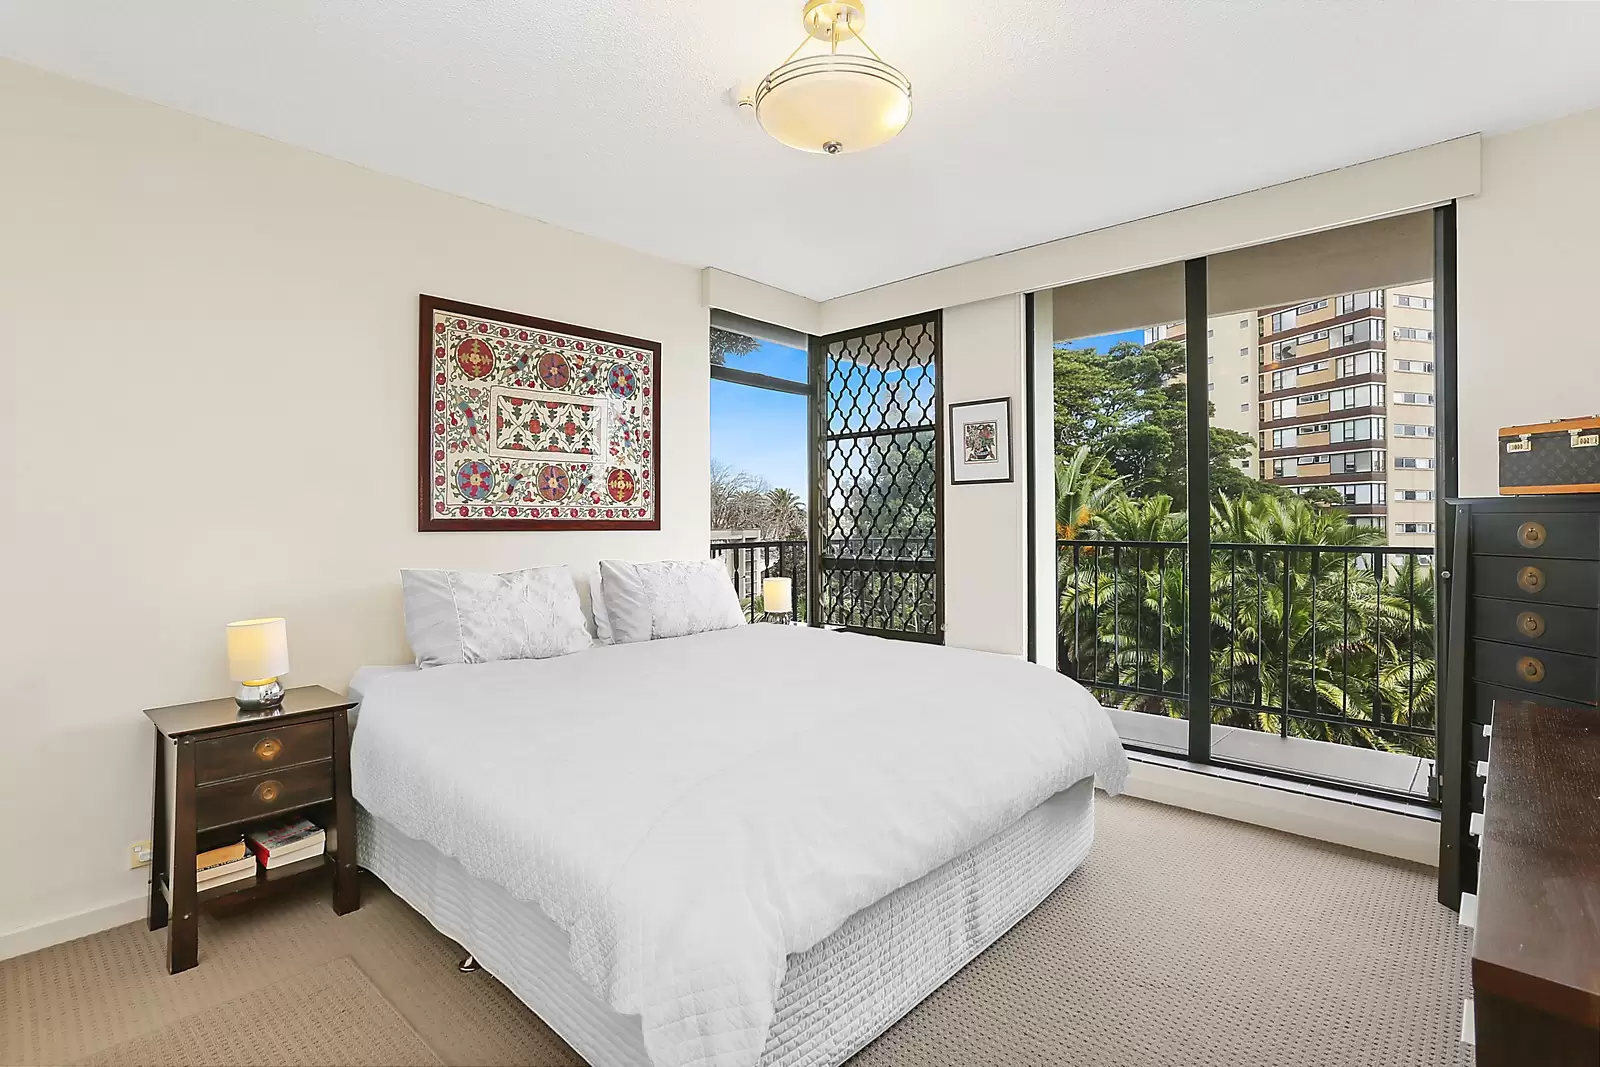 Photo #5: 1B/13 Thornton Street, Darling Point - Sold by Sydney Sotheby's International Realty